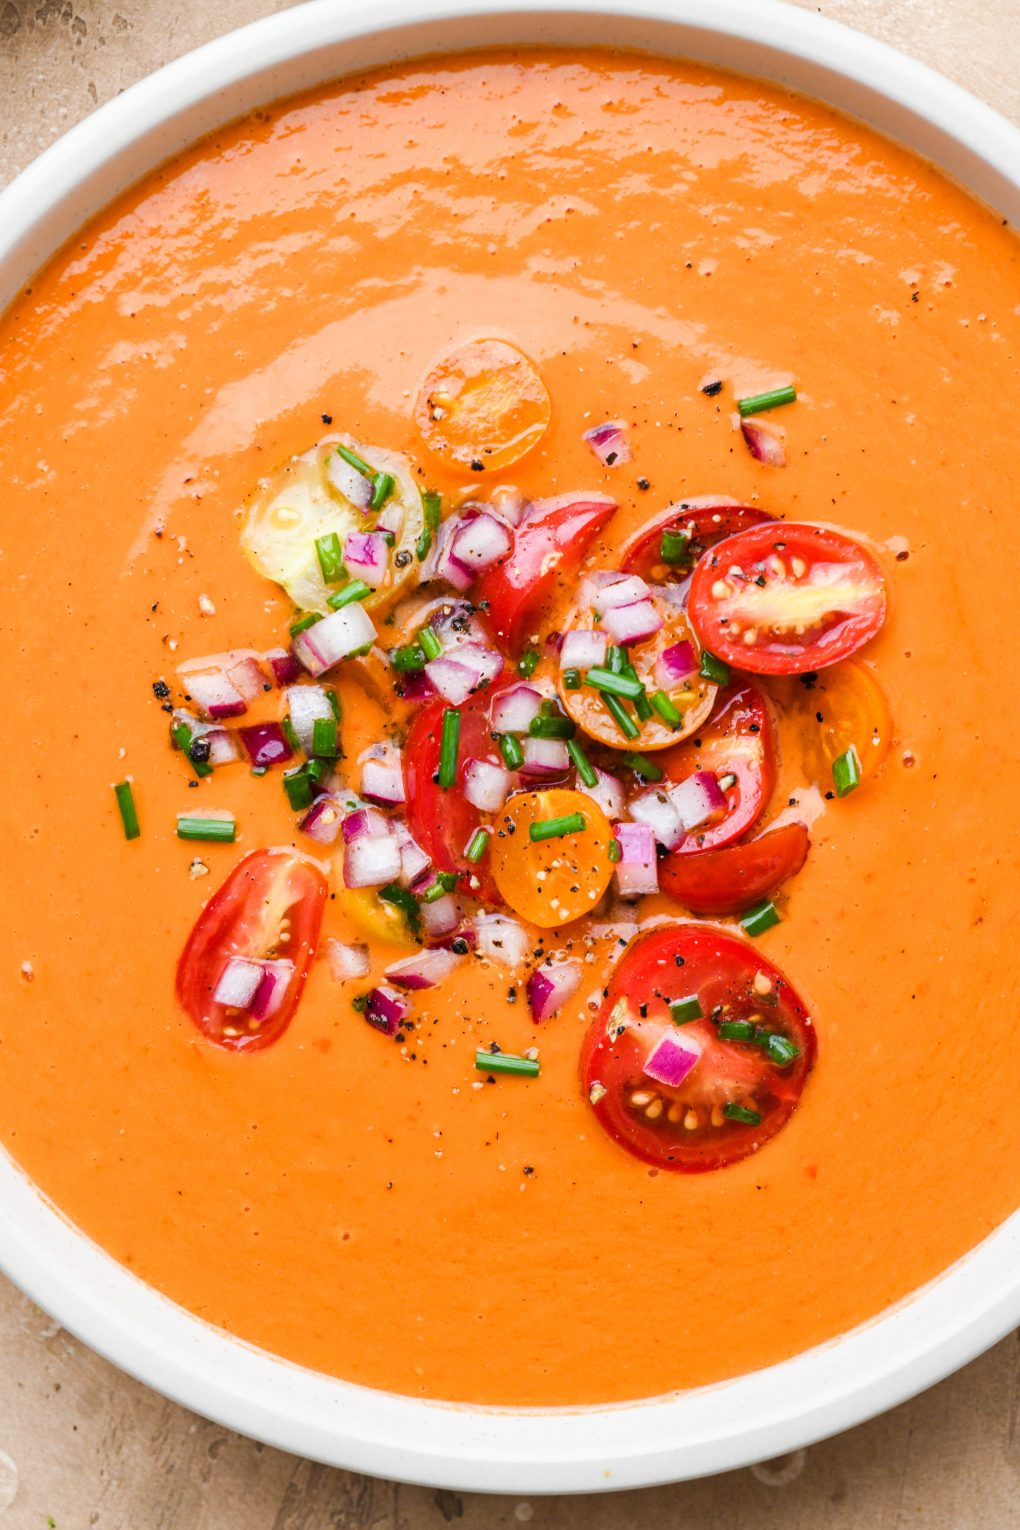 A large shallow bowl of bright orange healthy gazpacho. Topped with a cherry tomato salad and snipped fresh chives. On a light brown textured background.